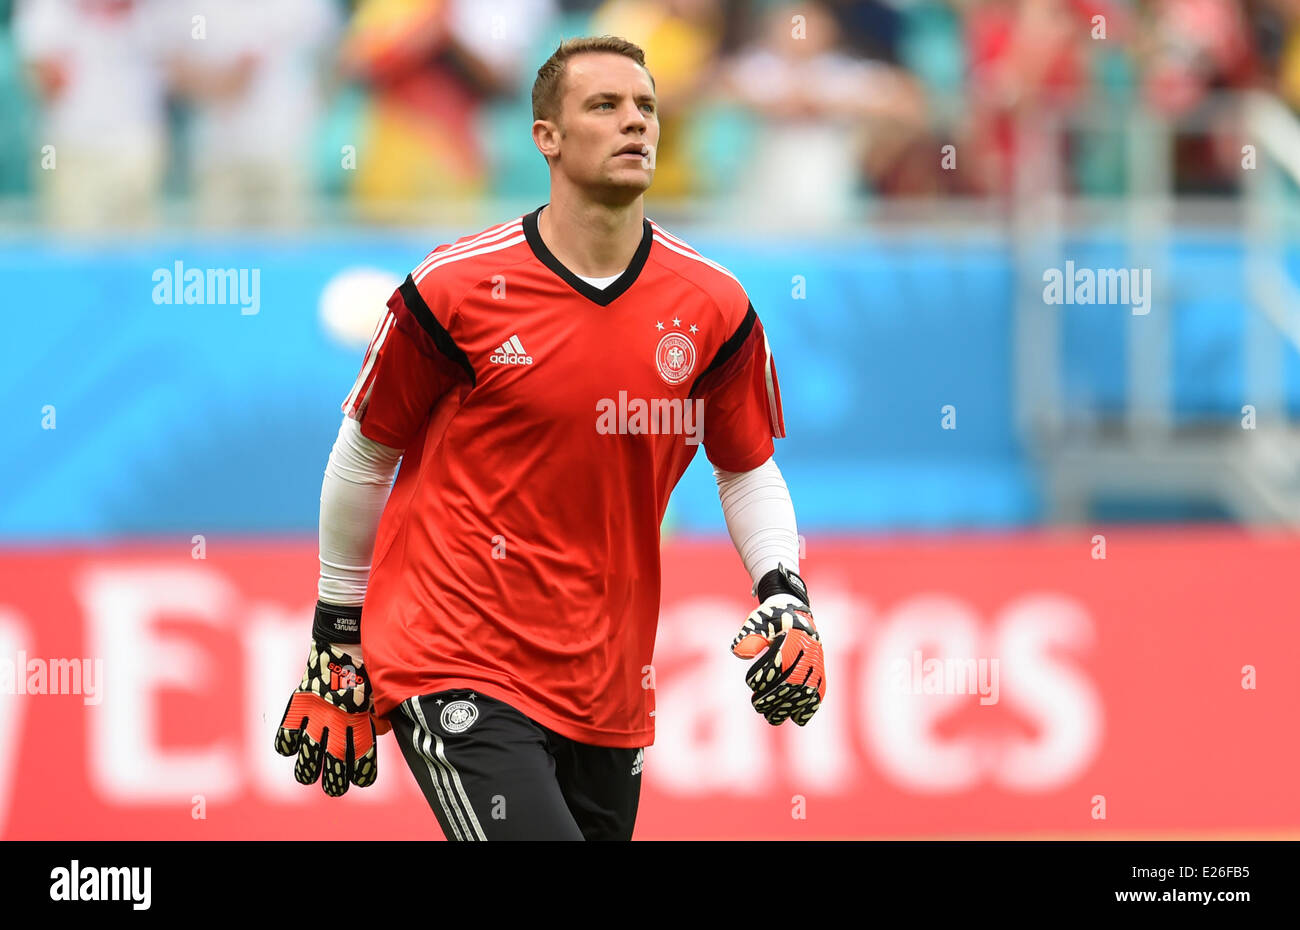 Salvador da Bahia, Brazil. 16th June, 2014. Salvador da Bahia, Brazil.  16th June, 2014. Manuel Neuer of Germany warms up prior to the FIFA World Cup 2014 group G preliminary round match between Germany and Portugal at the Arena Fonte Nova Stadium in Salvador da Bahia, Brazil, 16 June 2014. /Alamy Live News EDITORIAL USE ONLY Credit:  dpa picture alliance/Alamy Live News Stock Photo